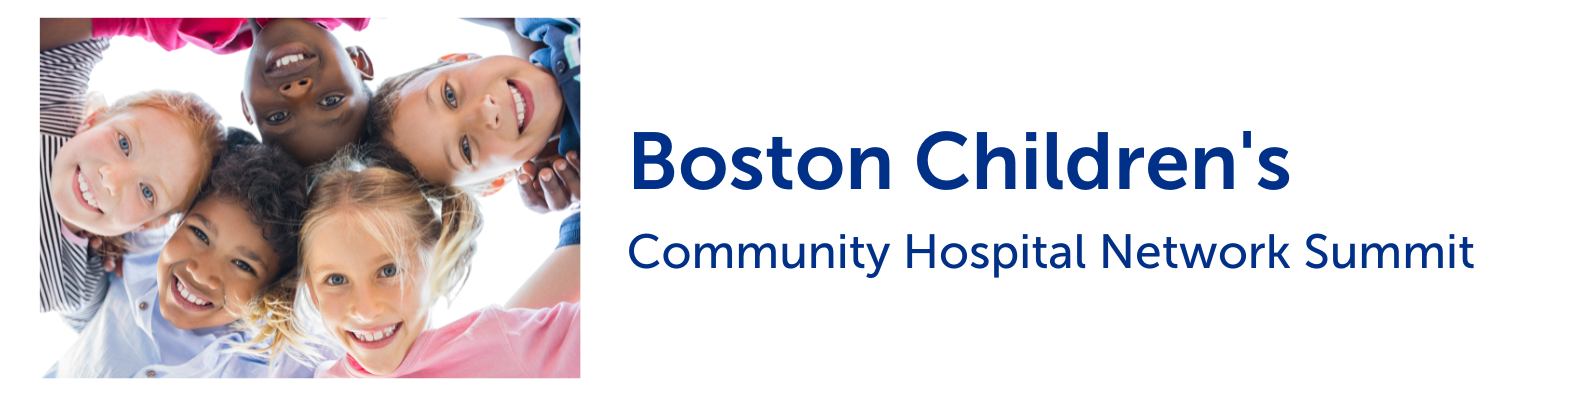 Boston Children's Community Hospital Network Summit. Hosted by South Shore Hospital, in partnership with Beverly Hospital, Milford Hospital, Southcoast Health, Winchester Hospital and Cape Cod Hospital Banner